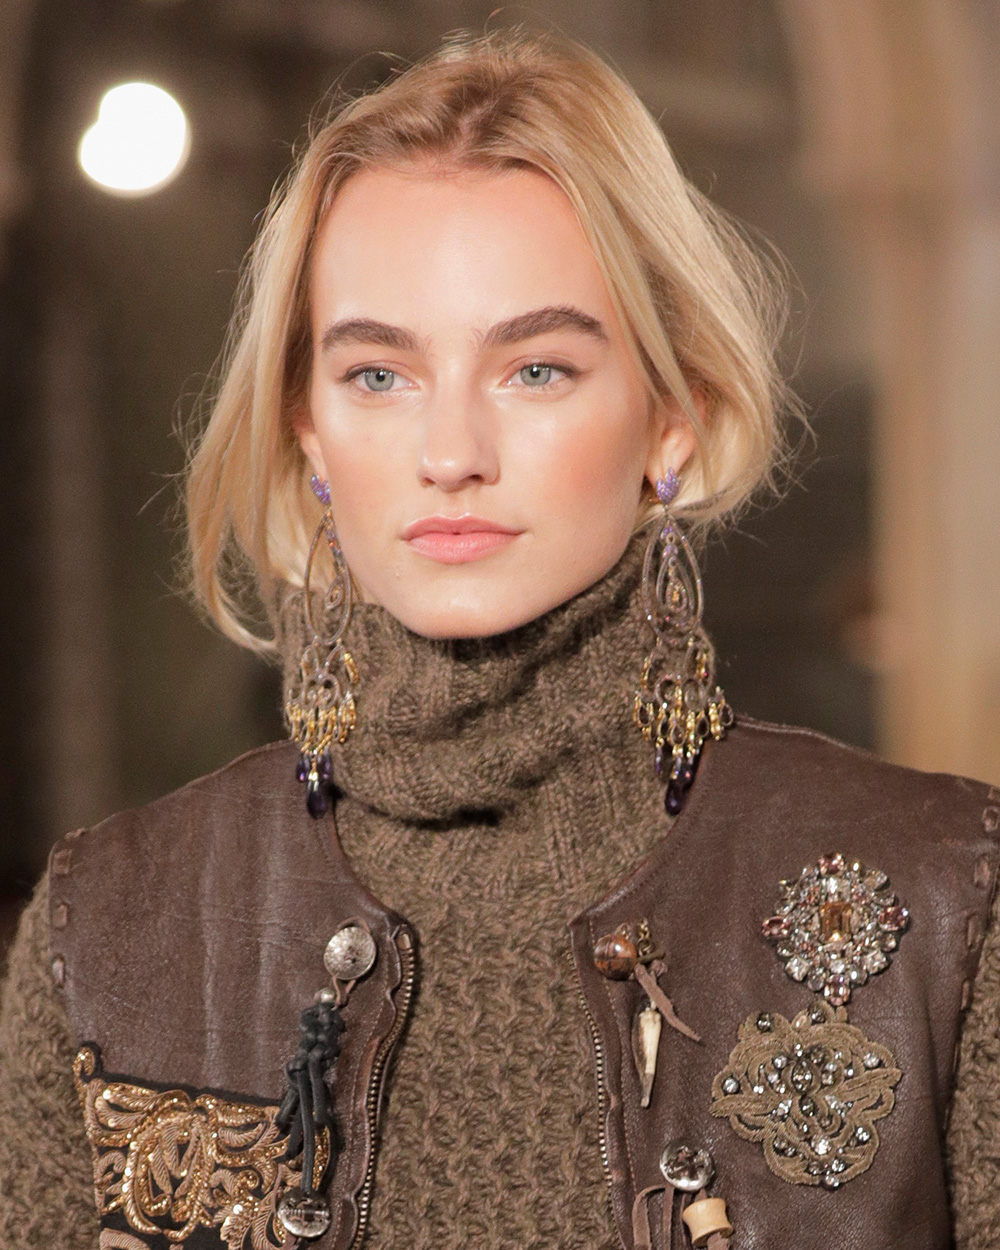 The best beauty looks from NYFW Ralph Lauren Barely-there make-up and softly bushy brows kept things low-key and refined at Ralph Lauren.